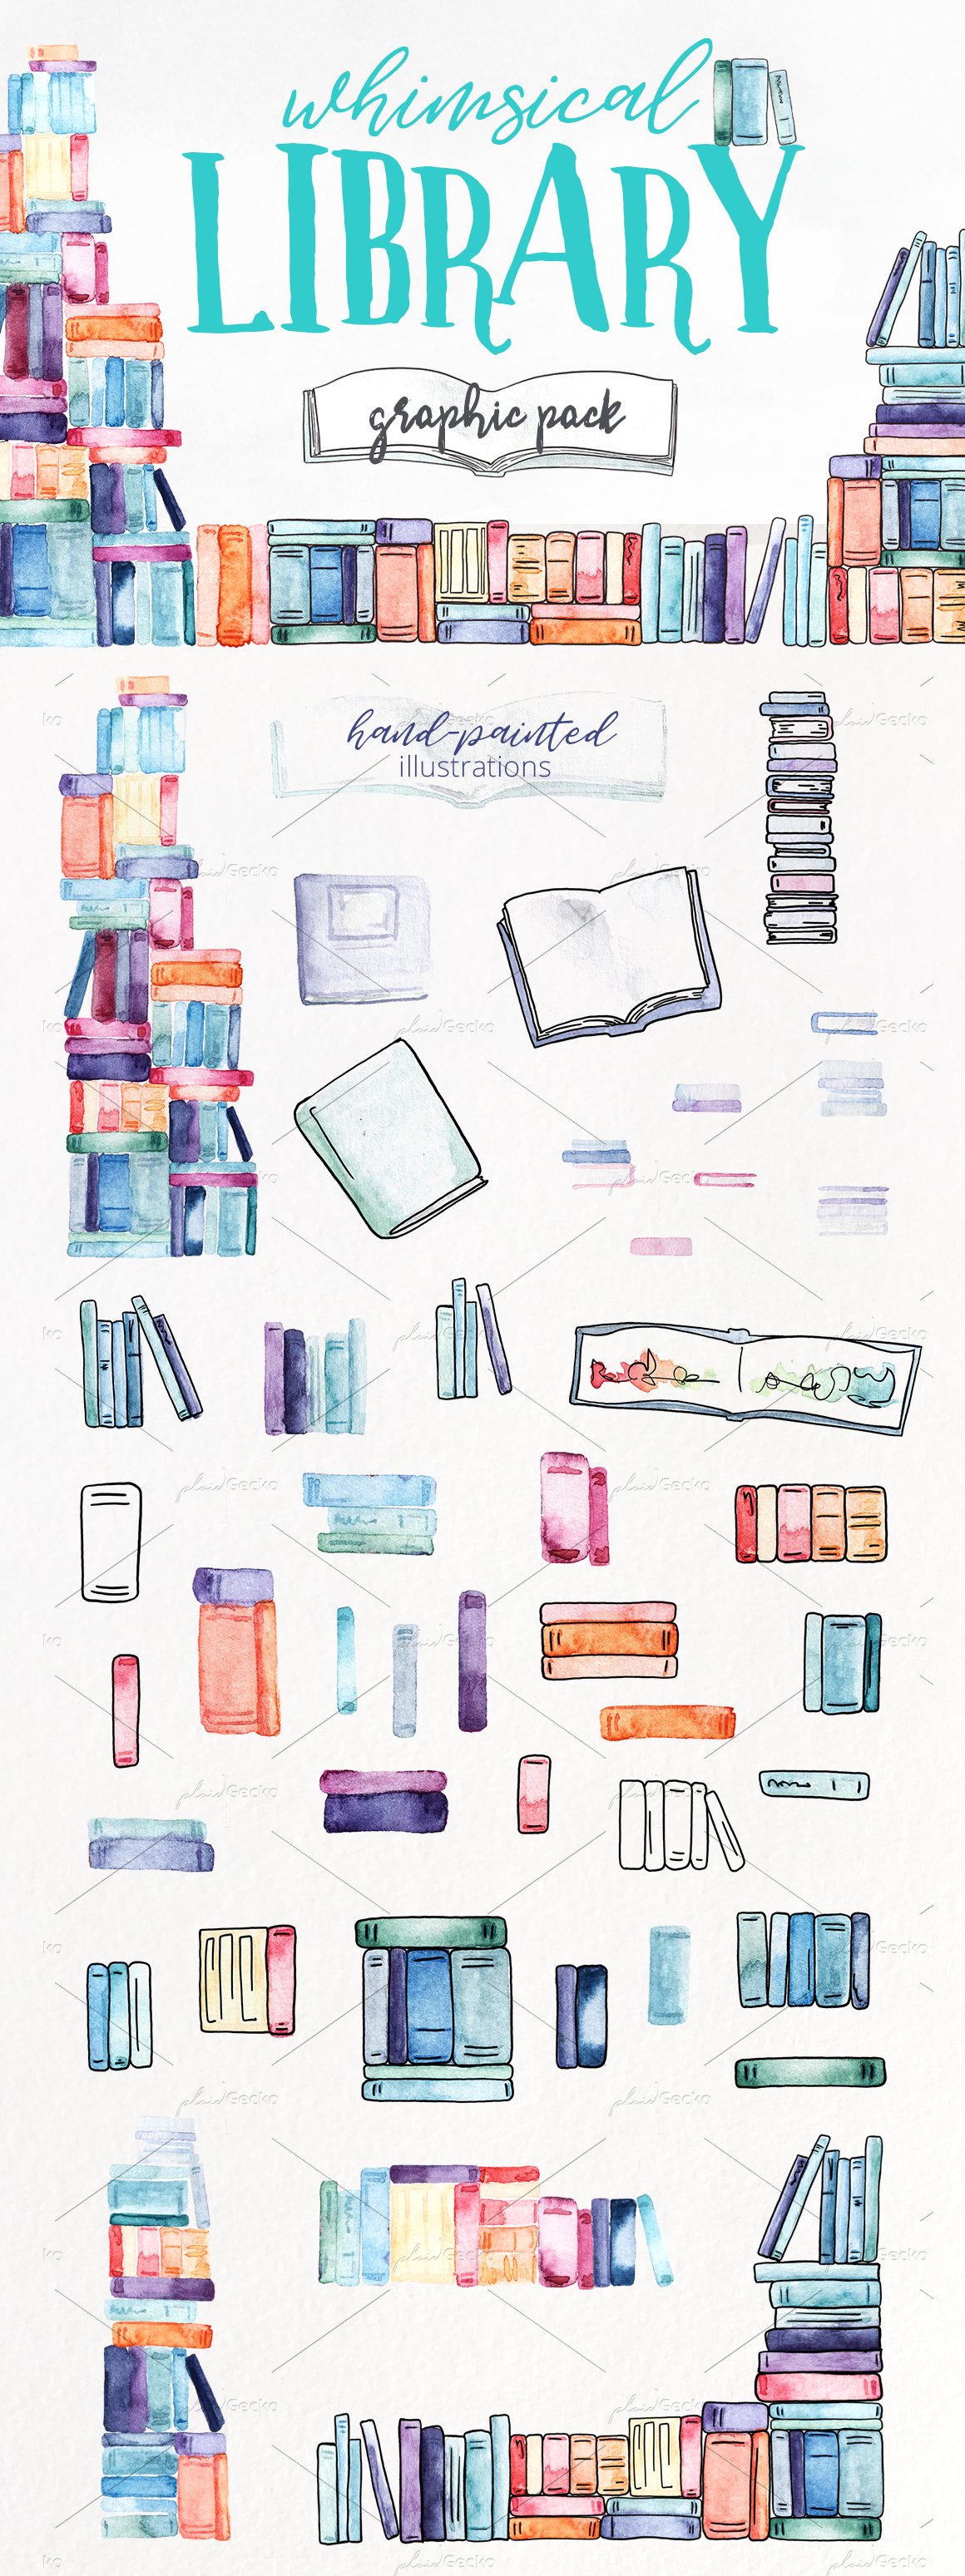 Cover image of Whimsical Library Books.